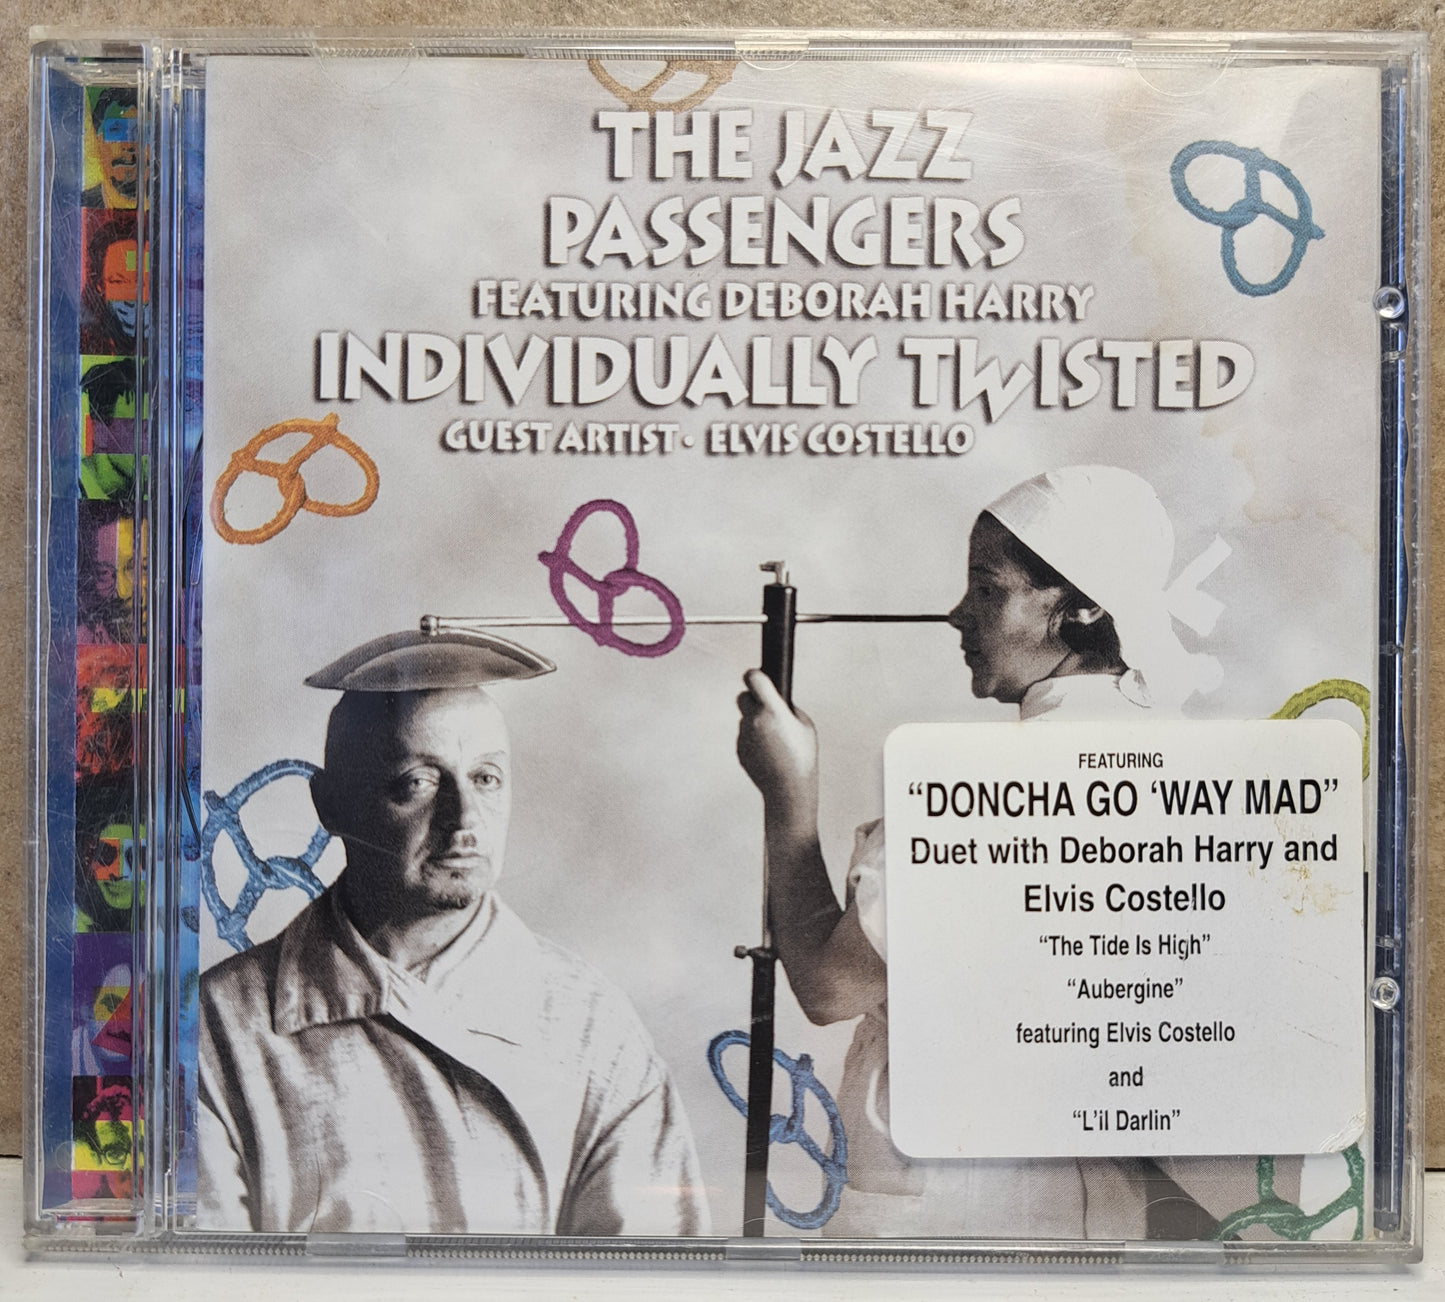 The Jazz Passengers - Individually Twisted (cd)